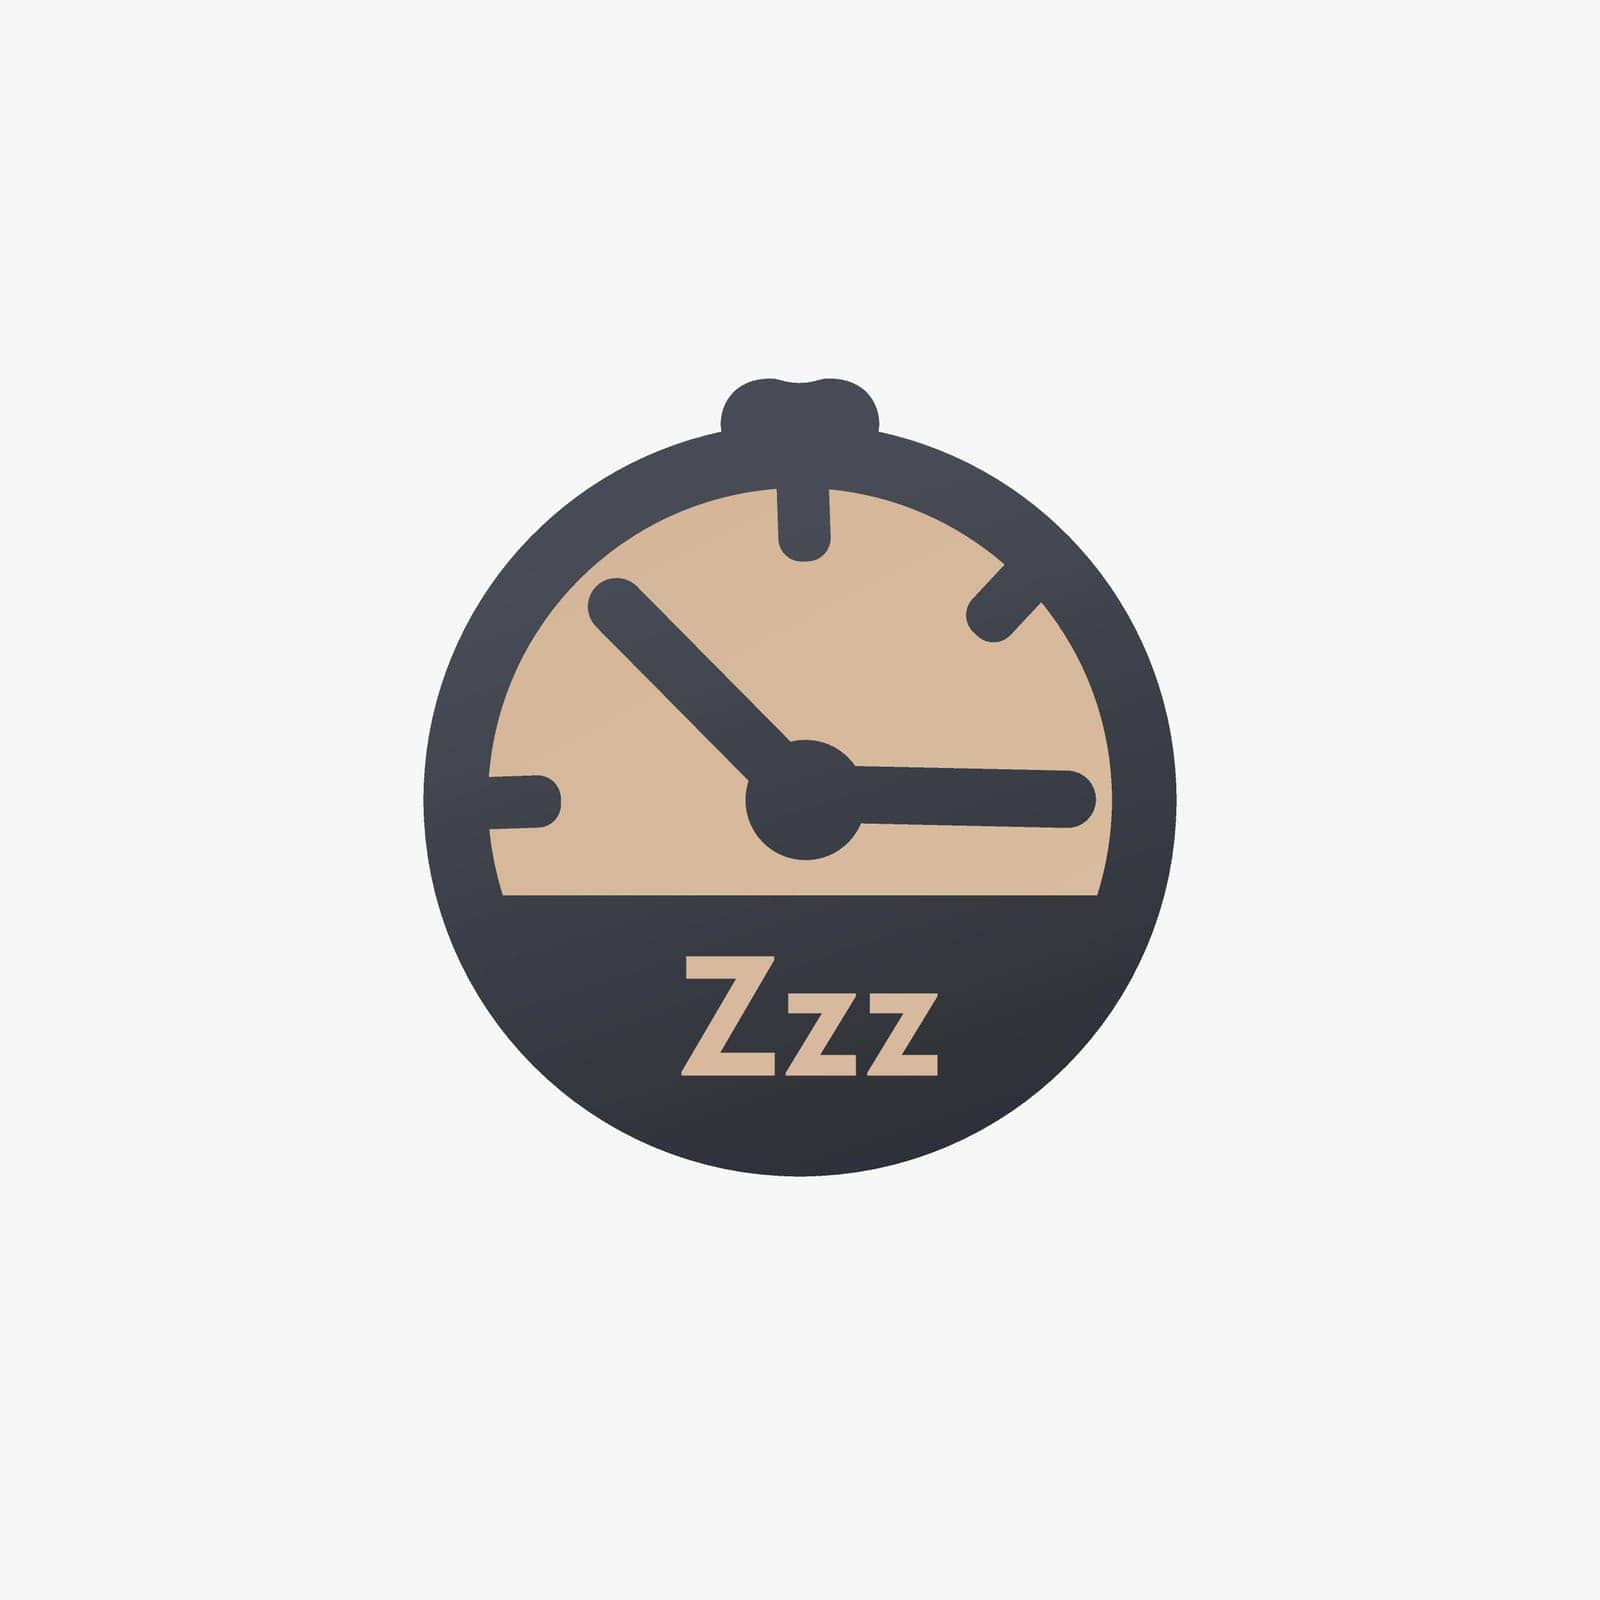 Clock Sleep Icon. Time to sleep, time to go to bed symbol. Stock vector illustration isolated